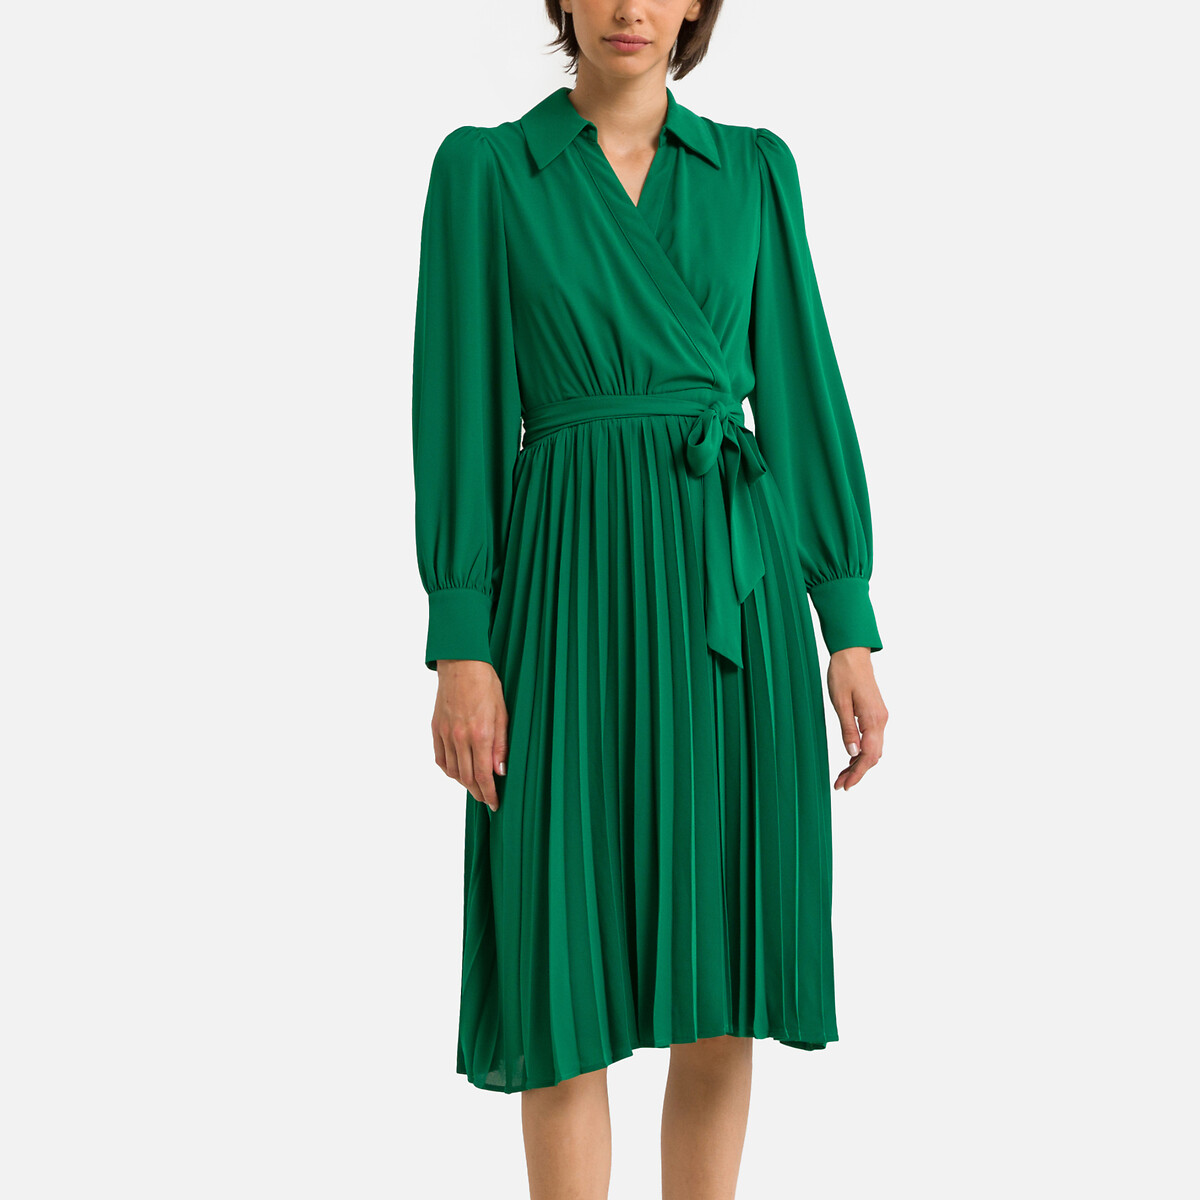 Cristal Recycled Pleated Dress with Long Sleeves